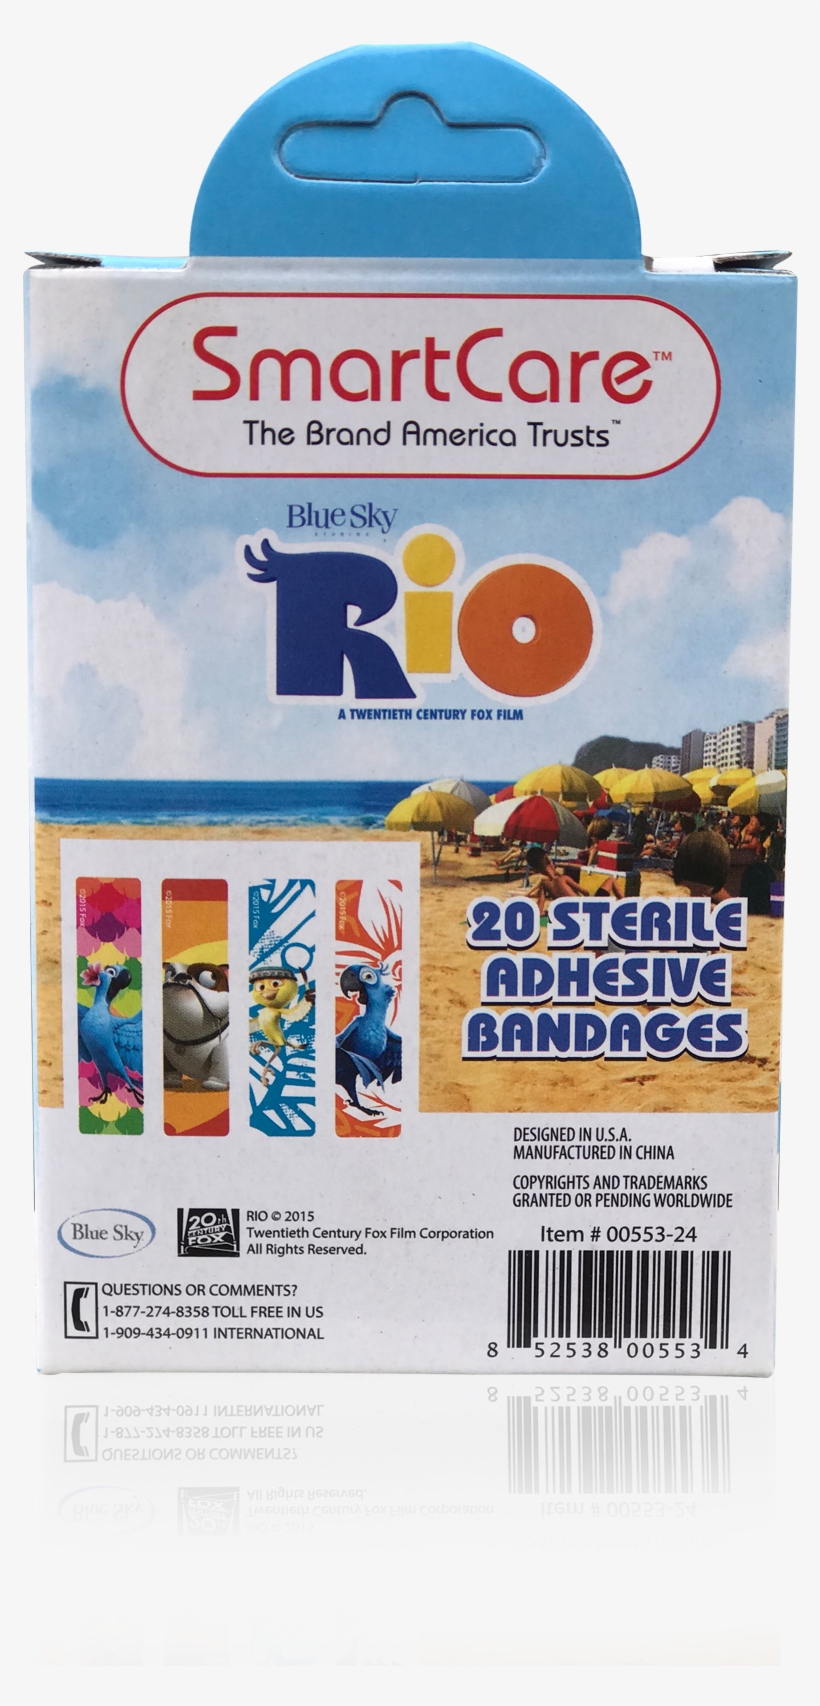 Load Image Into Gallery Viewer, Smart Care Rio Bandages - Rio 2, transparent png #9050480